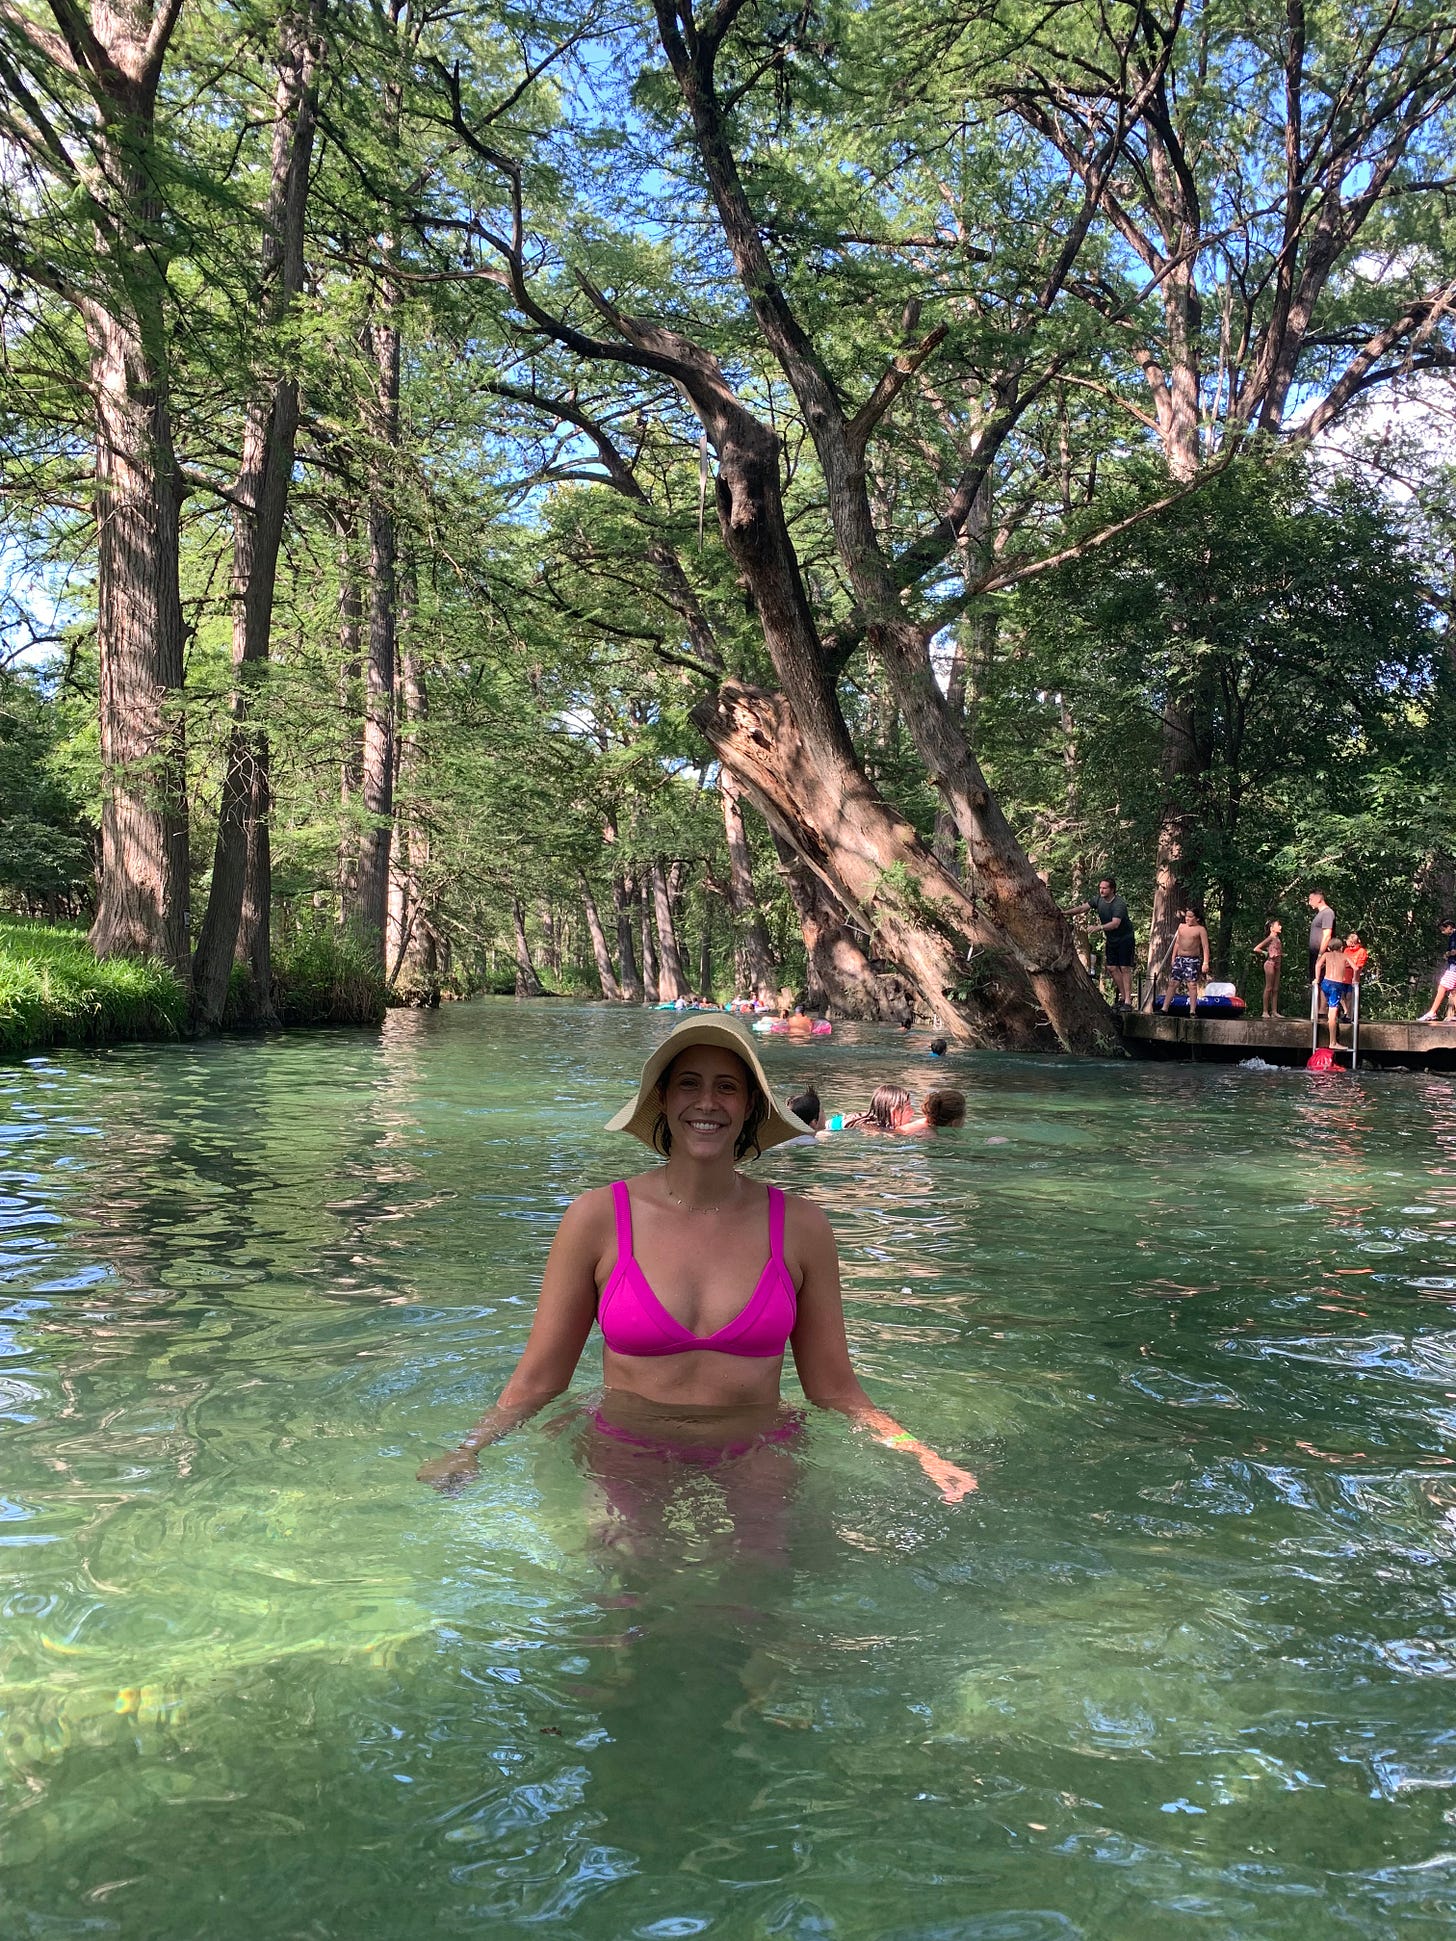 A woman smiles at the camera as she dips into spring water up to her waist. Large trees and people swimming loom in the background.